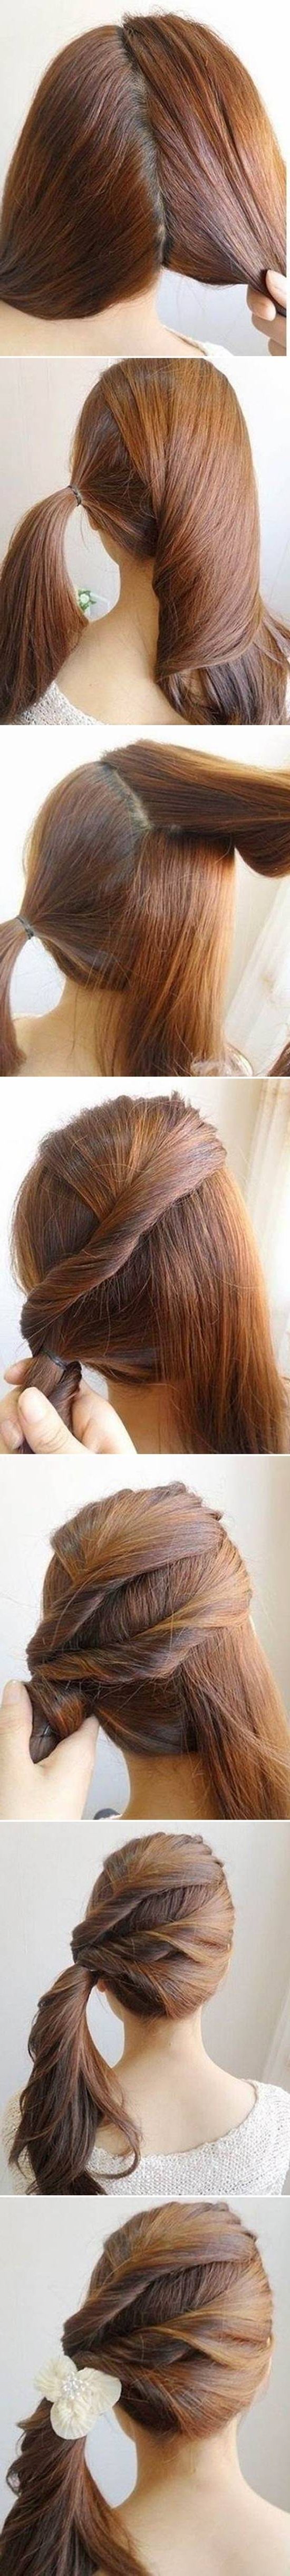 Hair For Well Liked Creative Side Ponytail Hairstyles (View 15 of 20)